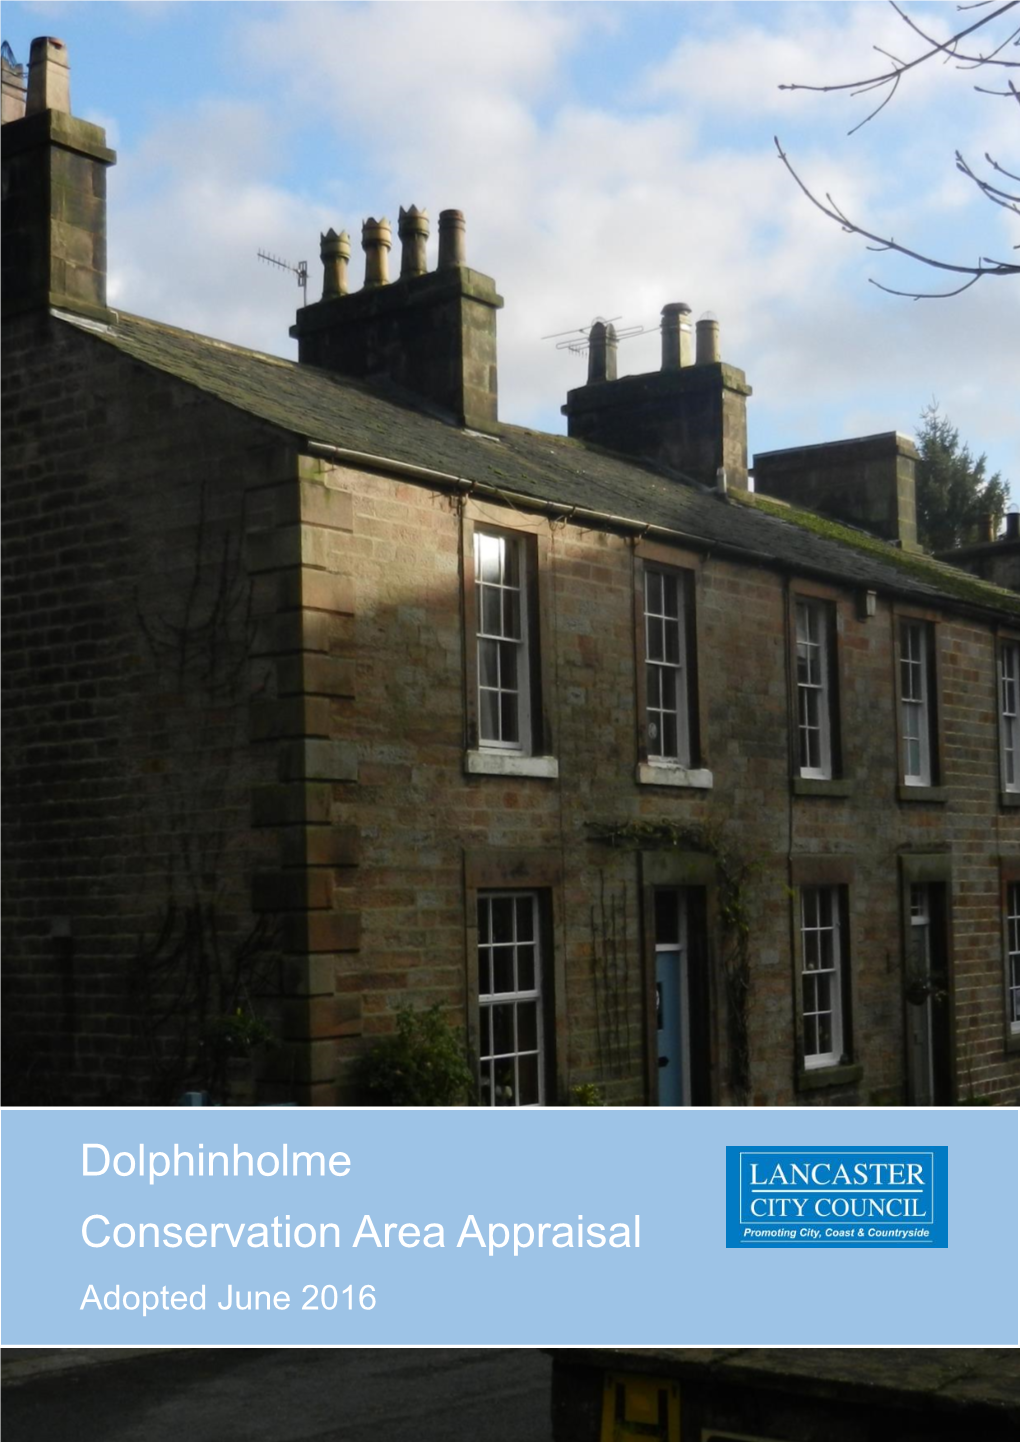 Dolphinholme Conservation Area Appraisal Adopted June 2016